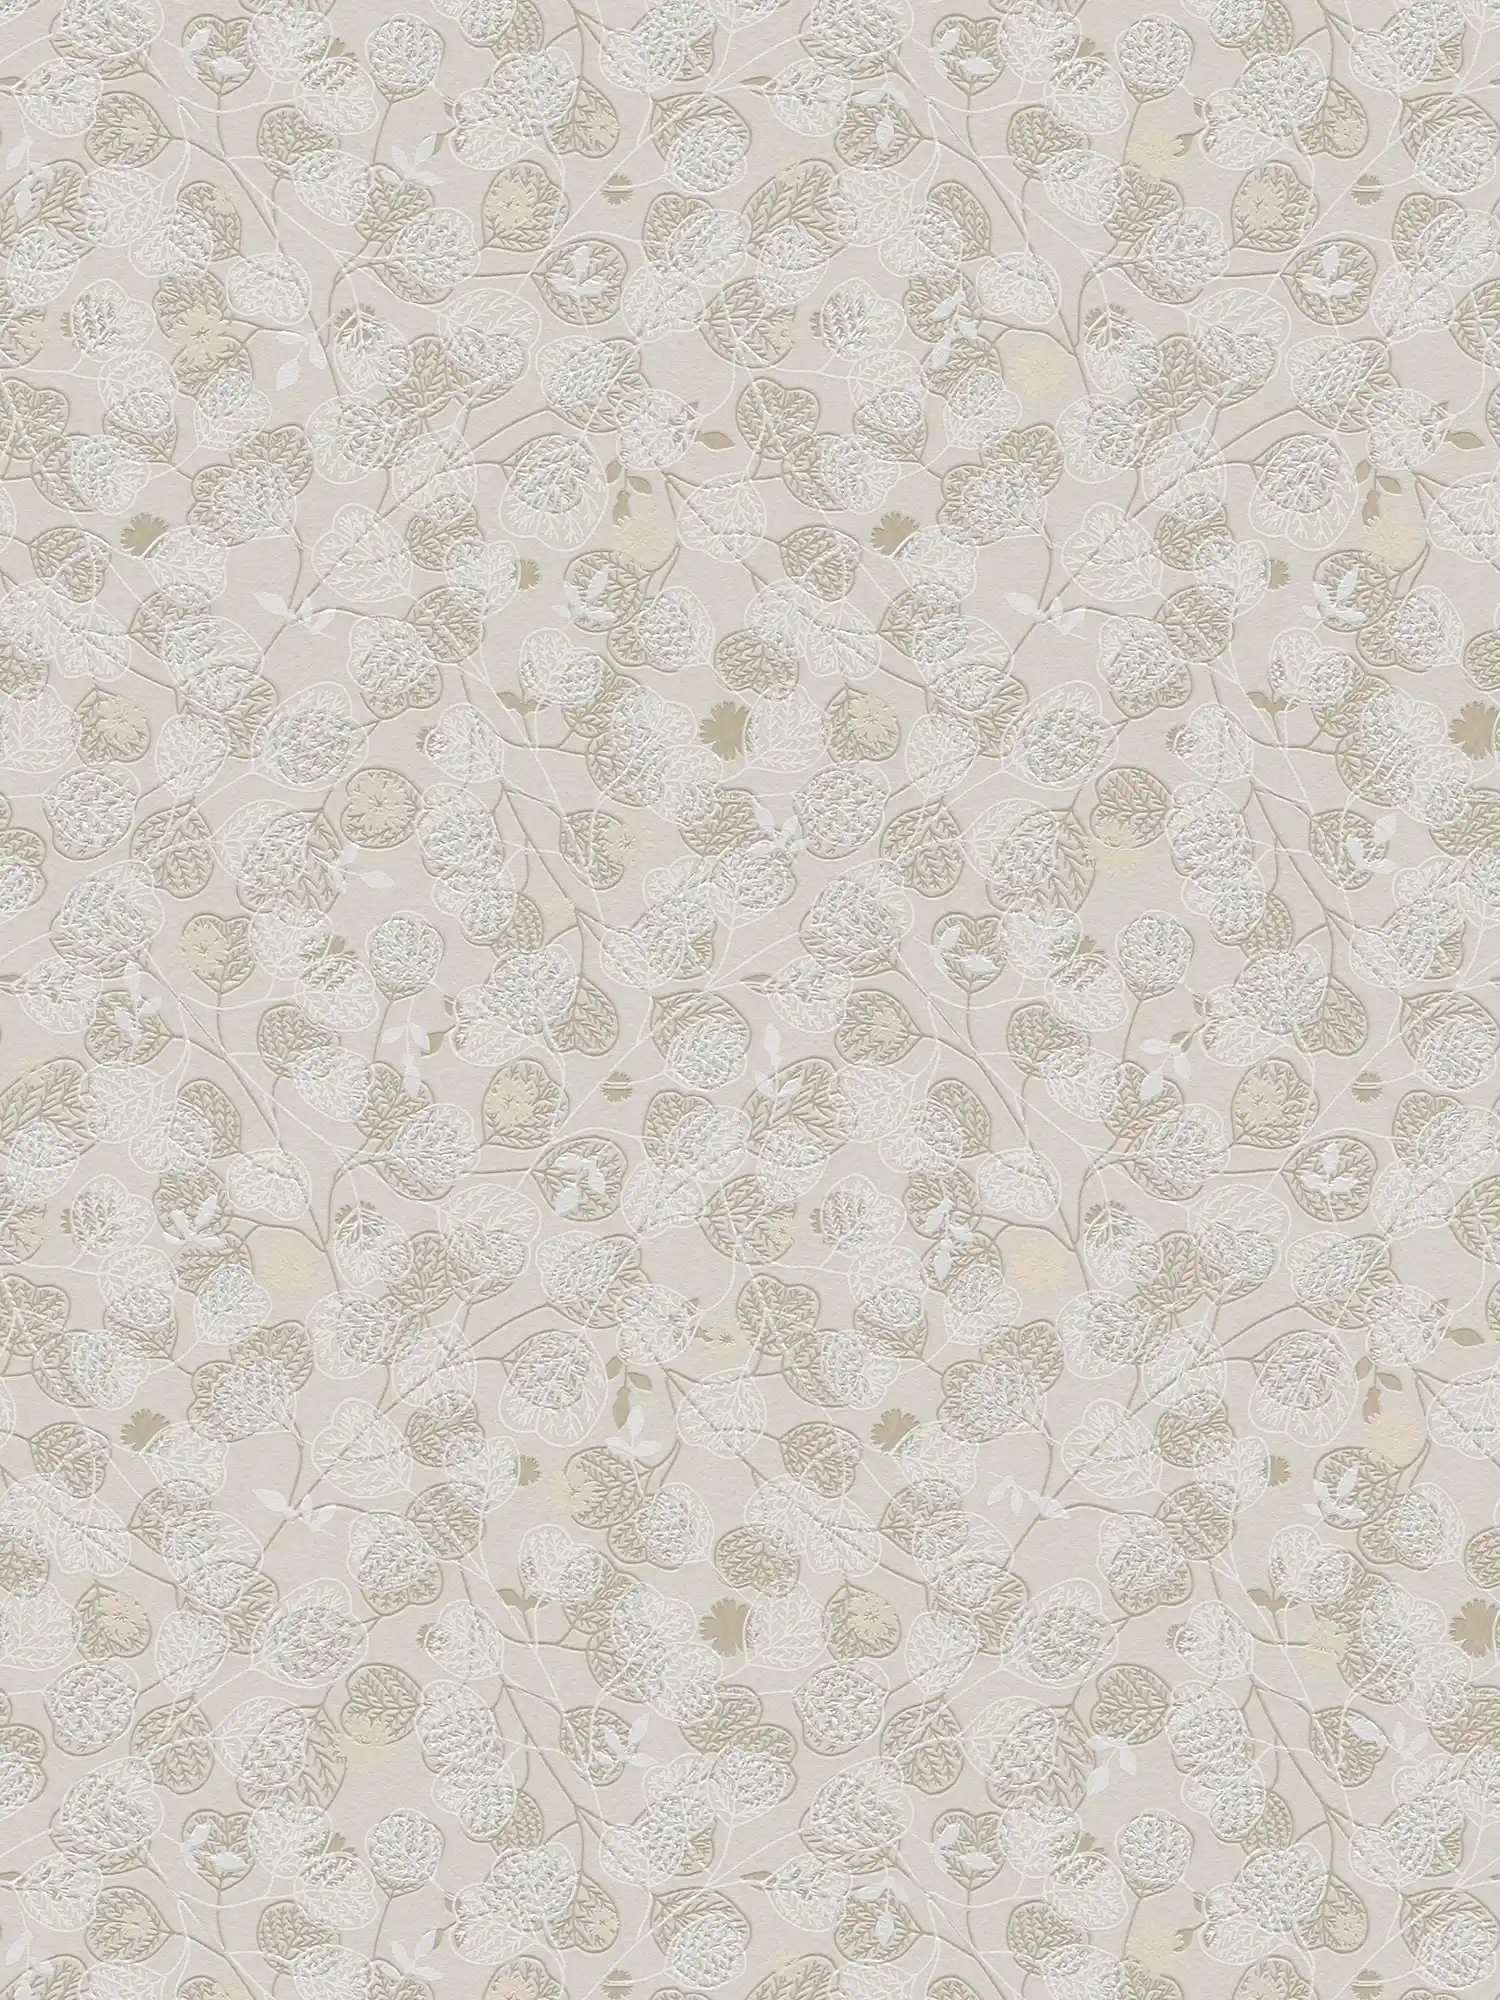 Non-woven wallpaper with floral blossom & leaf pattern - beige, white
